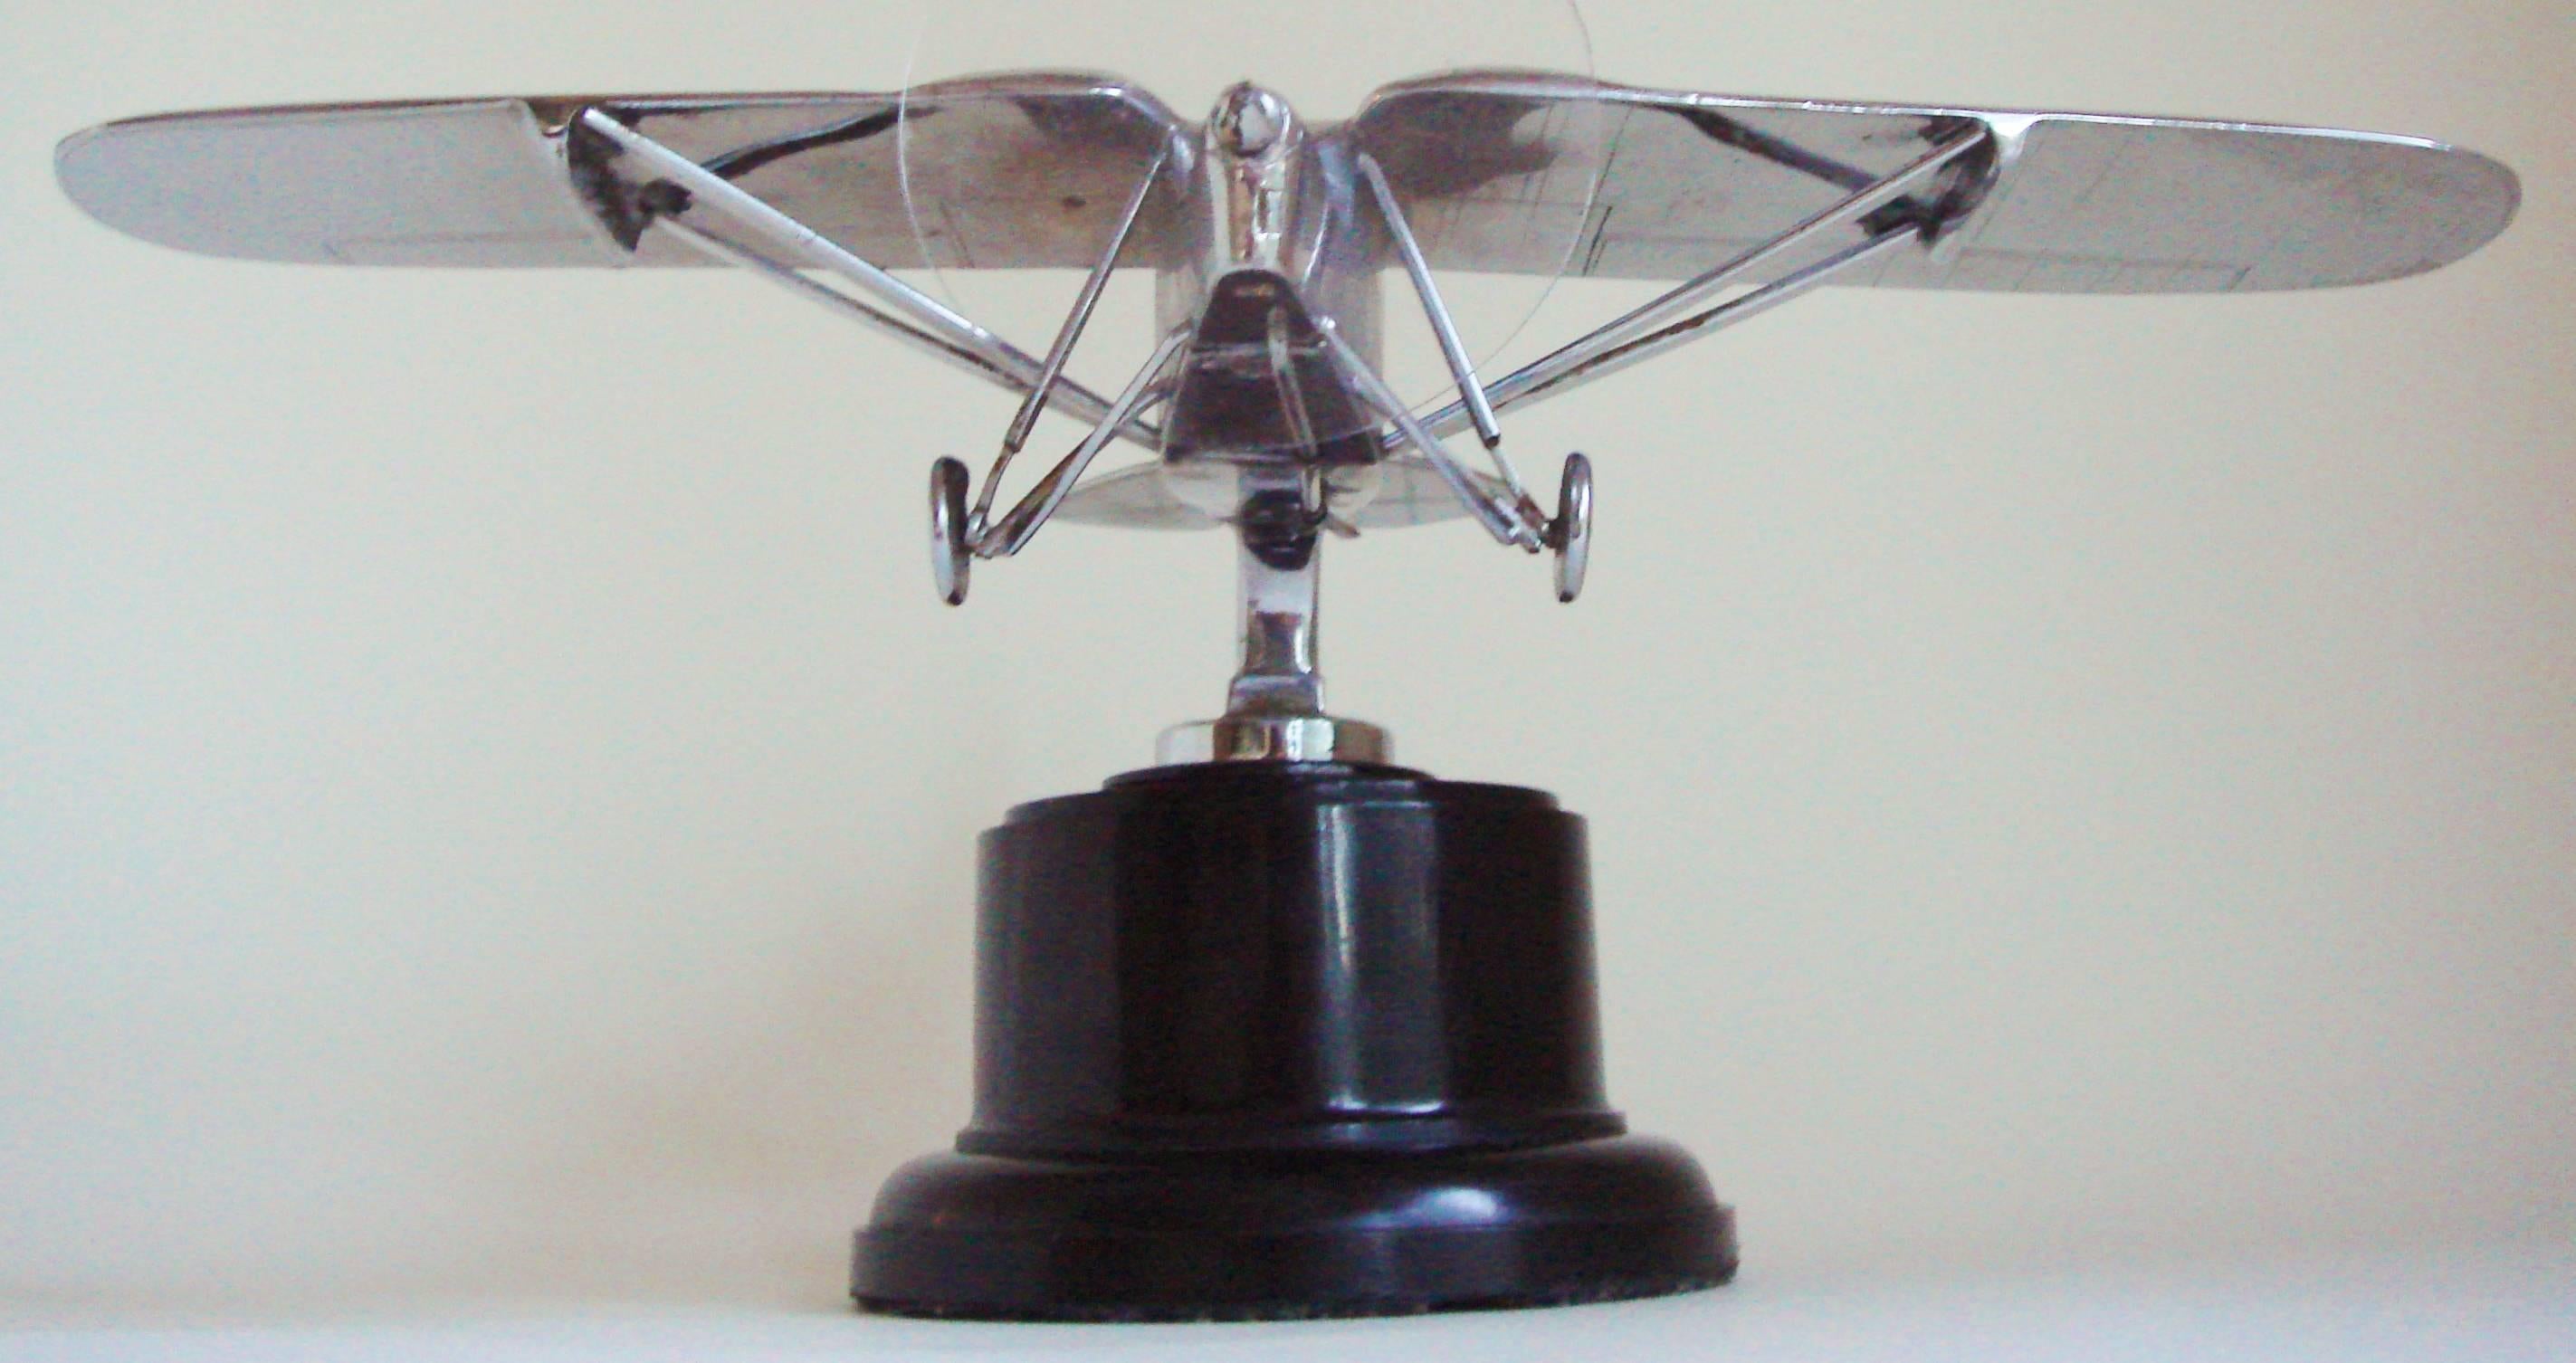 This large English Art Deco chrome-plated De Havilland Puss Moth car mascot/hood ornament would appear to be the work of R.A. Allen for the celebrated A.E. Lejeune company. It was he that designed the Puss Moth table lighter to commemorate the